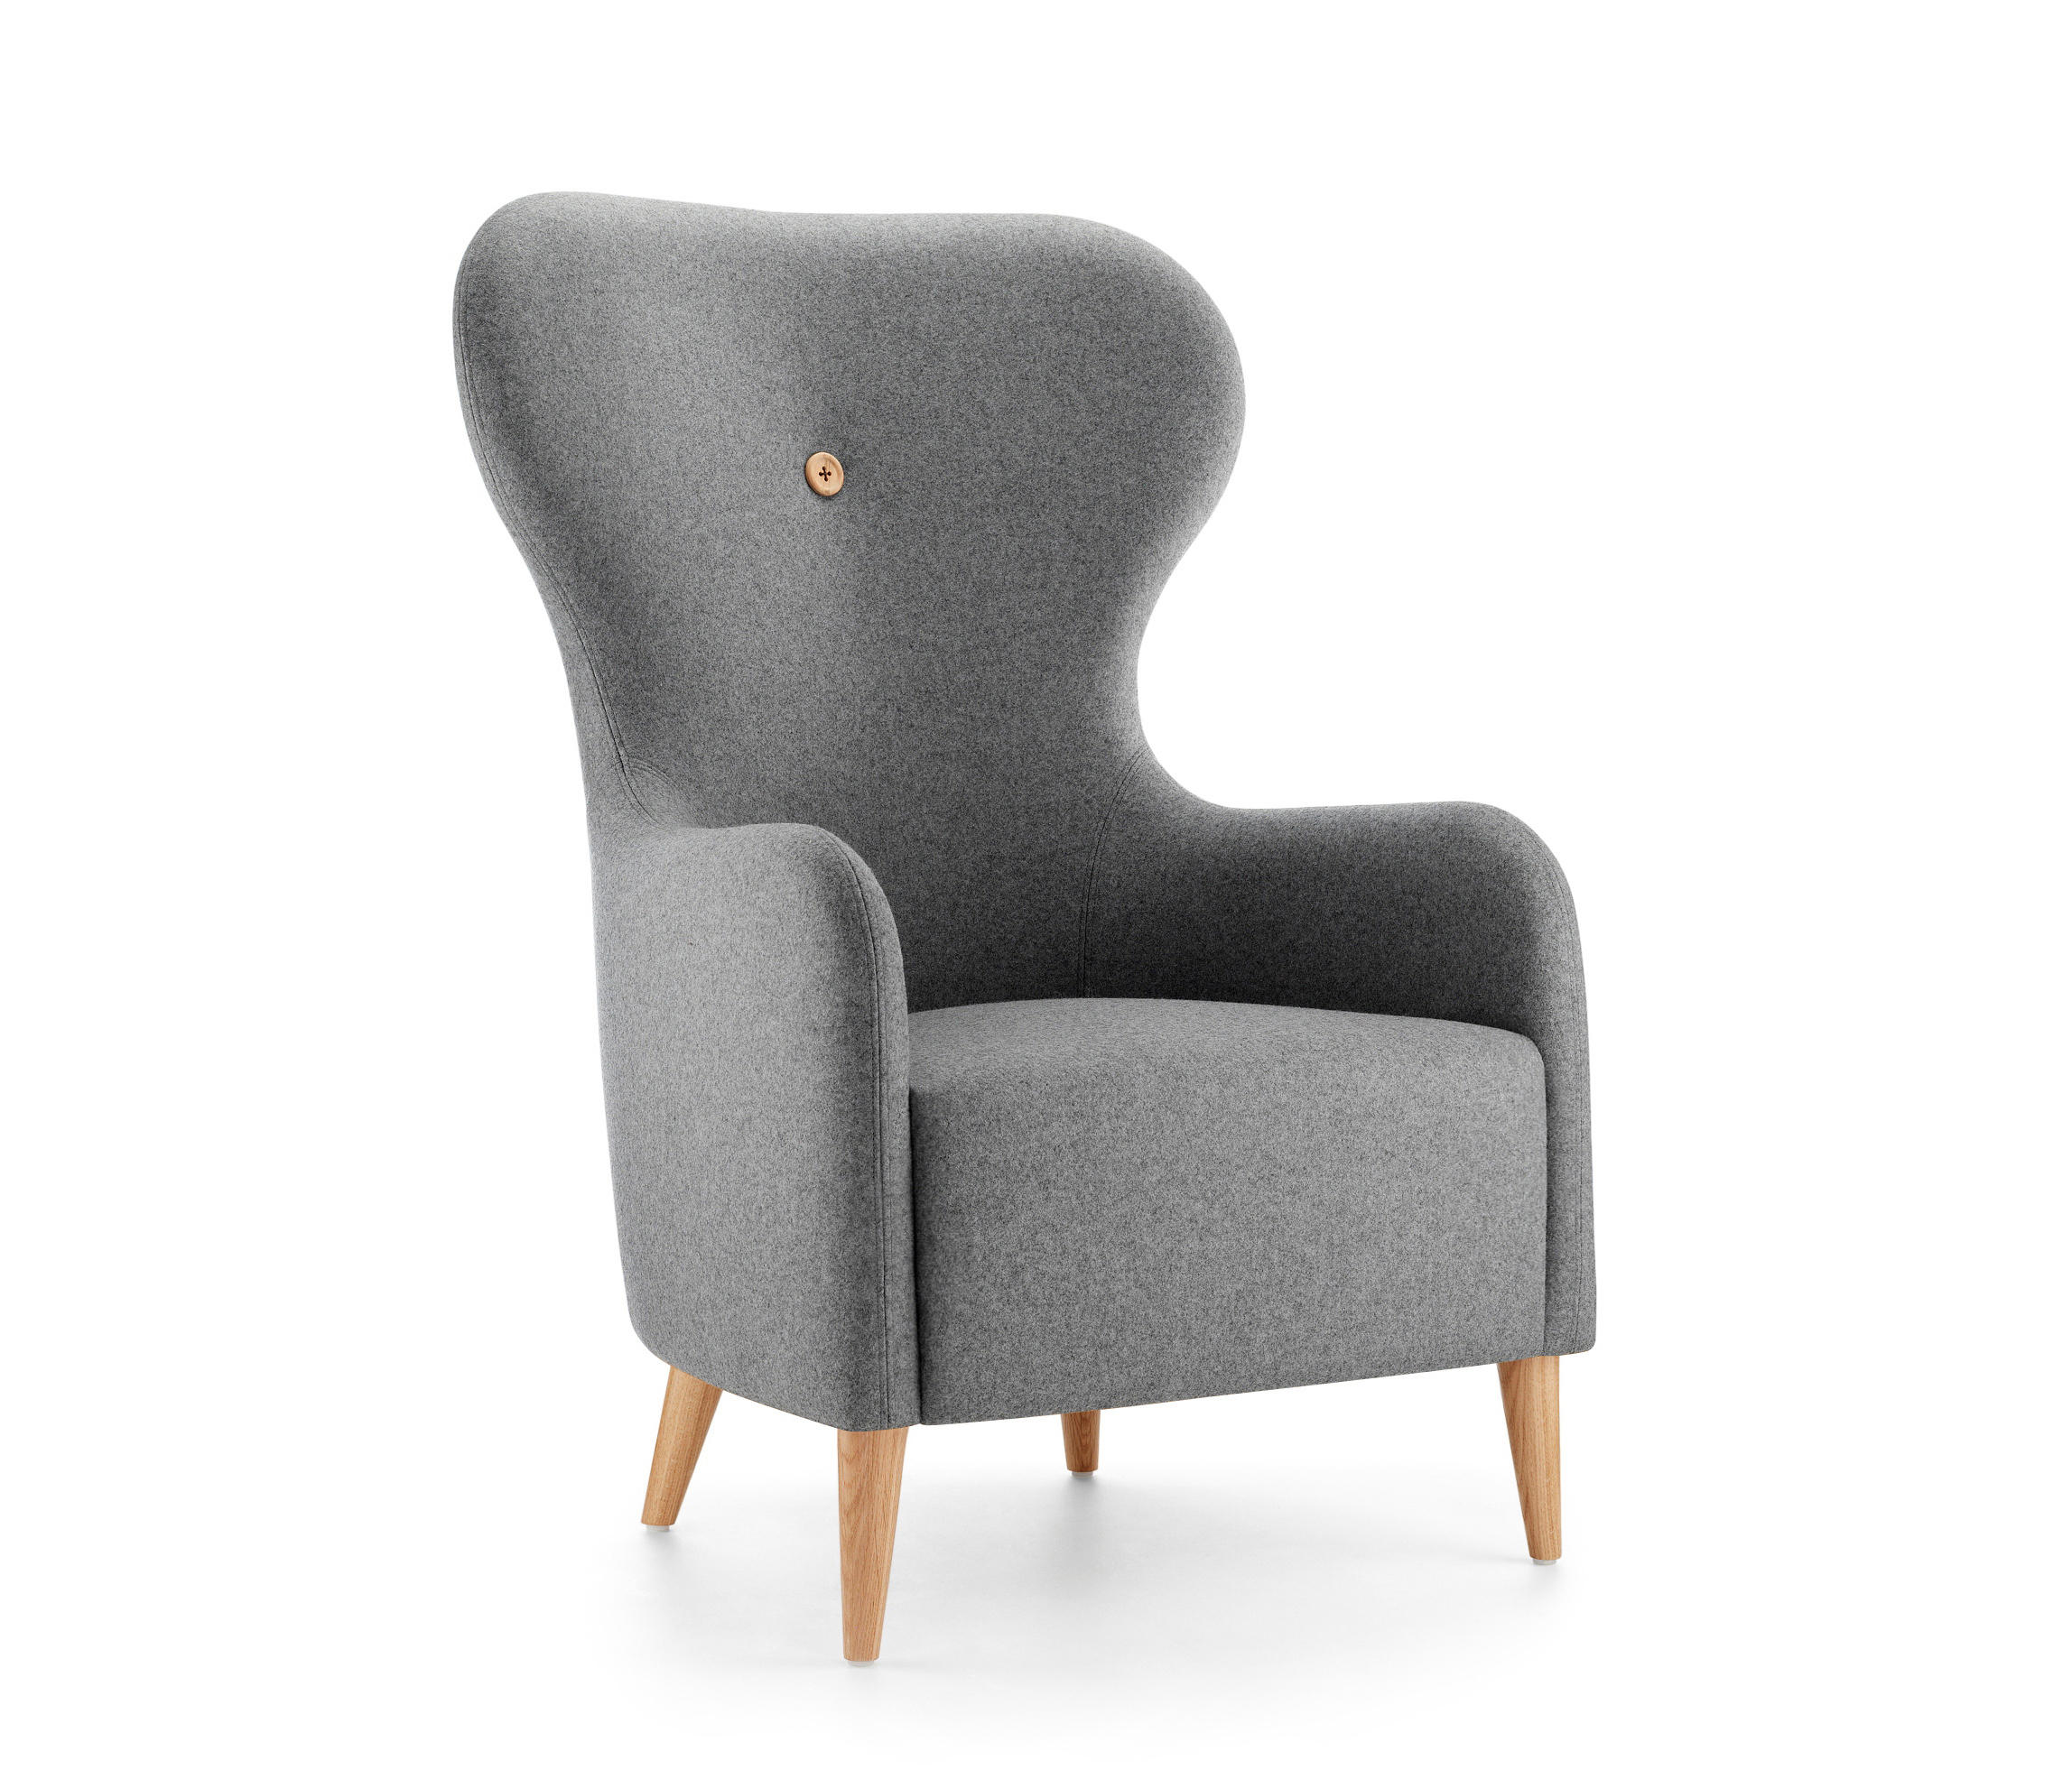 Mr Armchairs From Boss Design Architonic